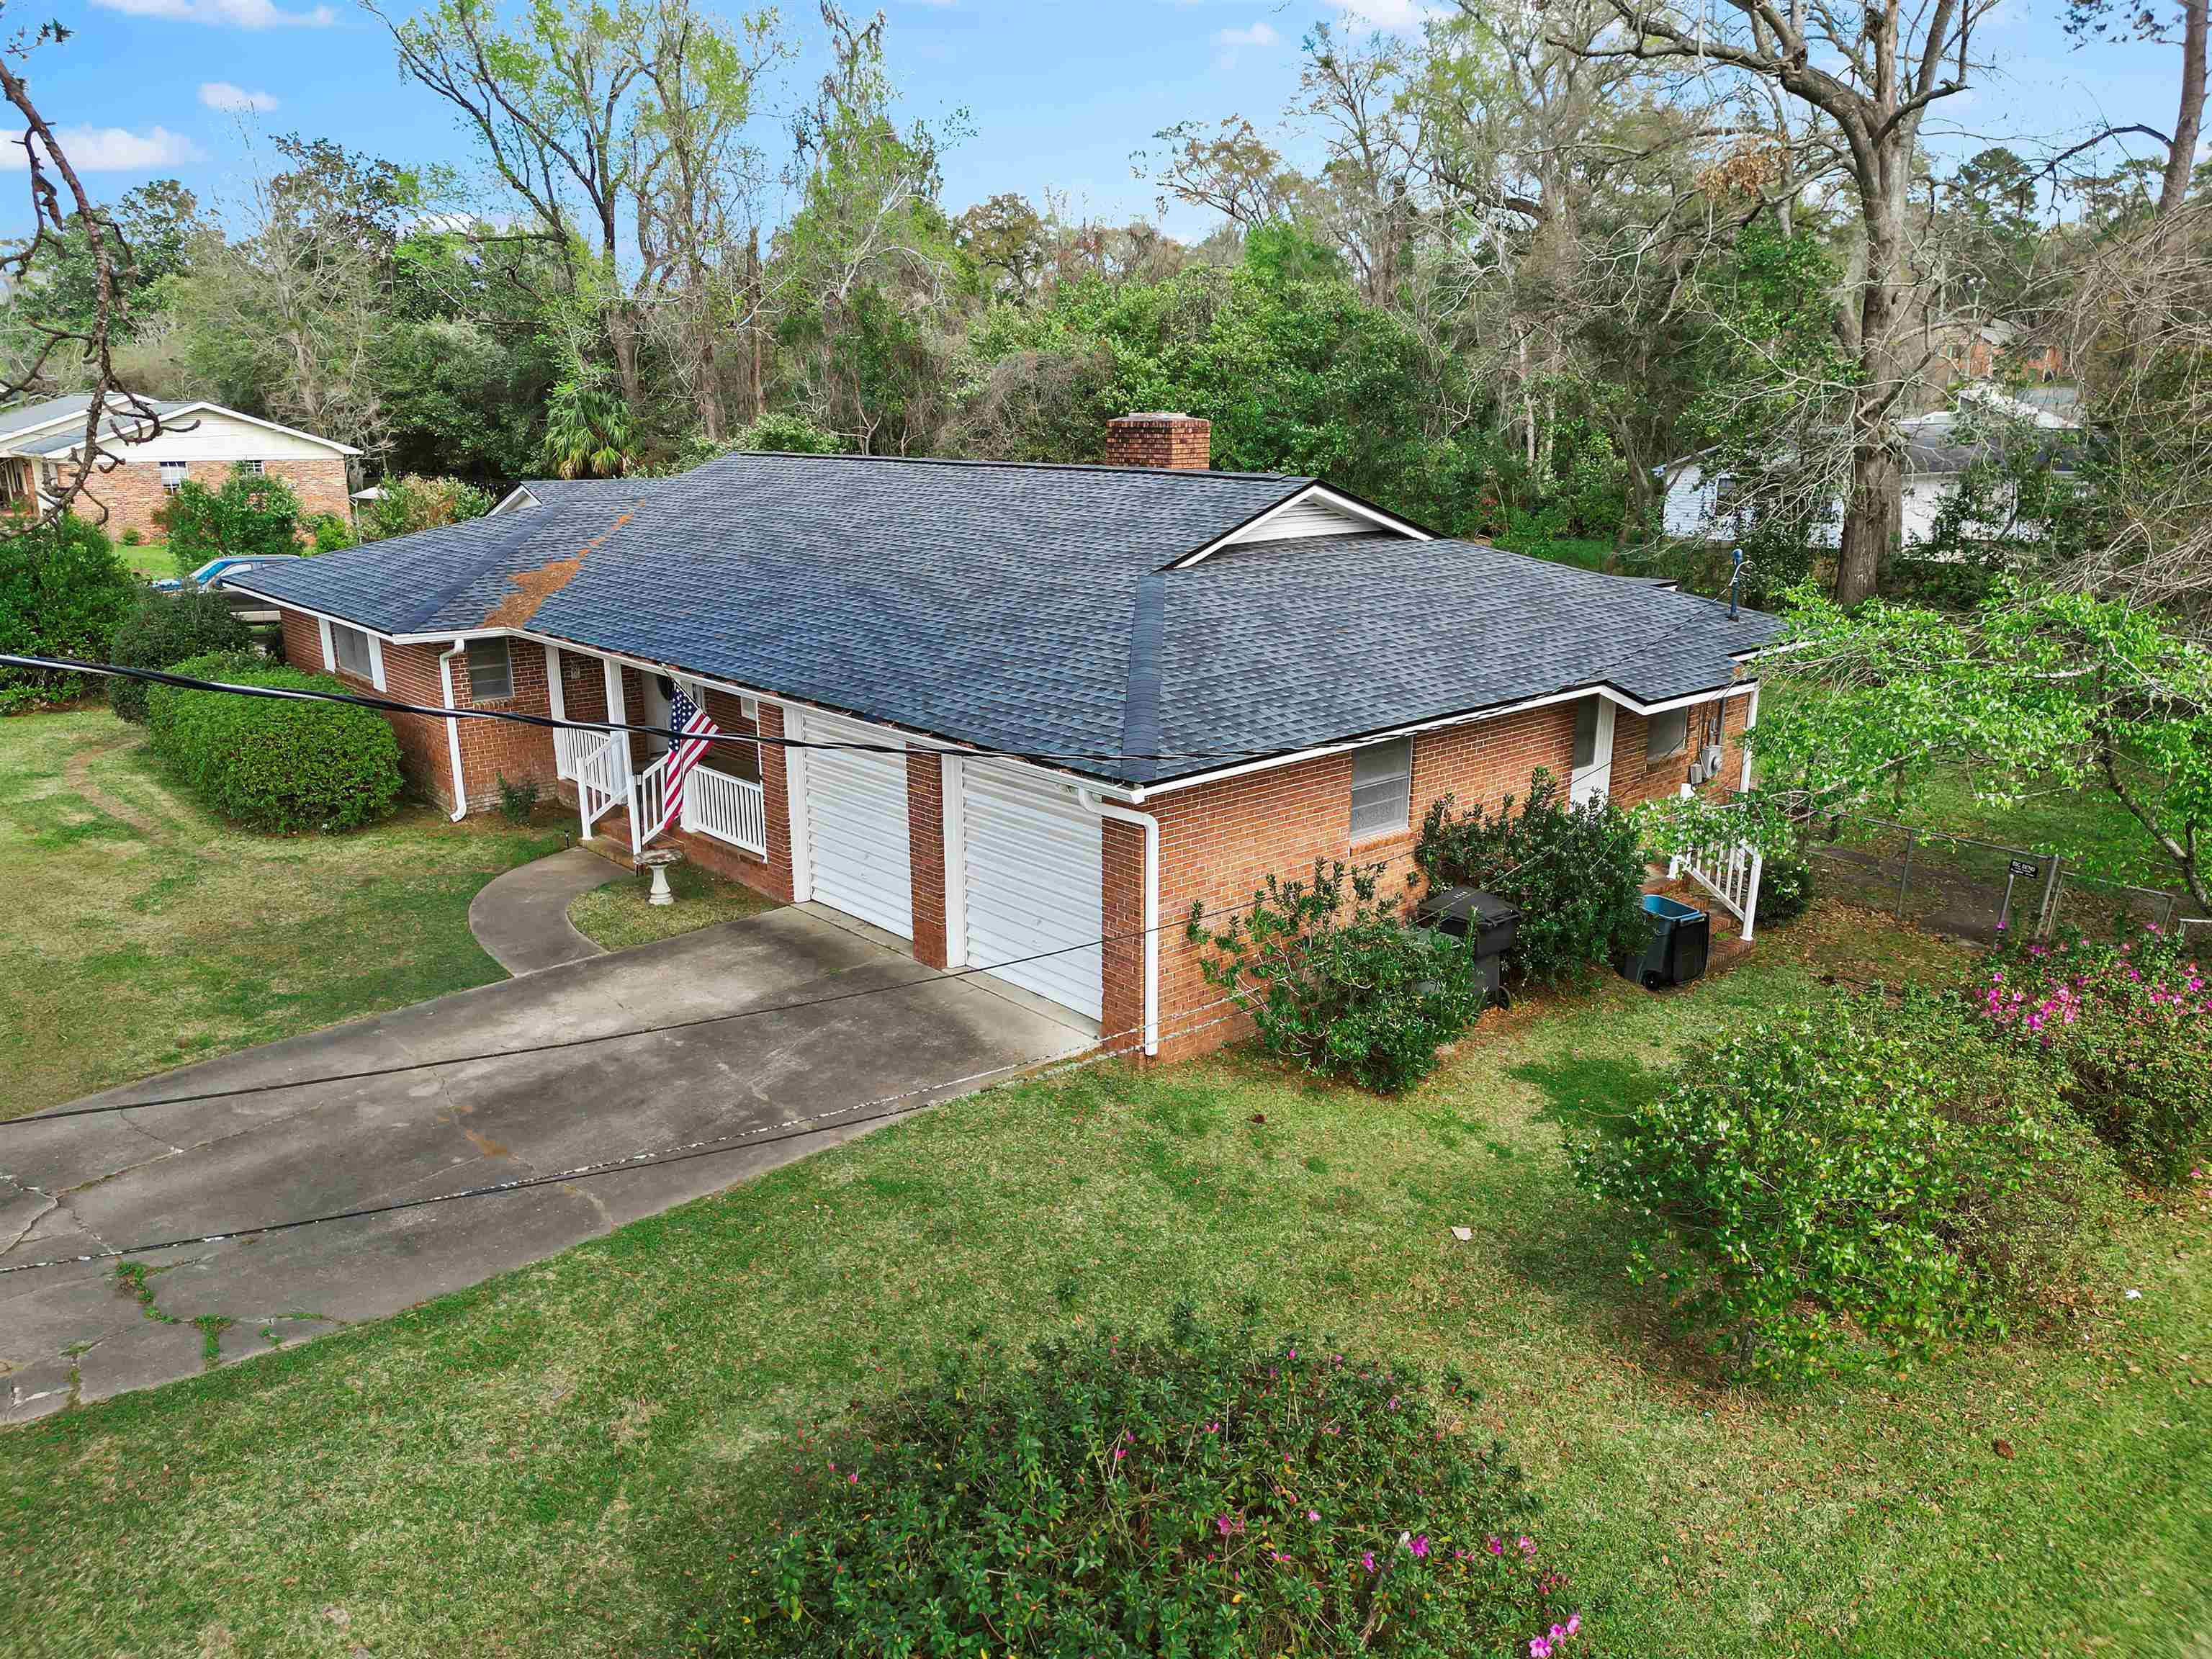 1111 Bonnie Drive,TALLAHASSEE,Florida 32304,3 Bedrooms Bedrooms,2 BathroomsBathrooms,Detached single family,1111 Bonnie Drive,369382